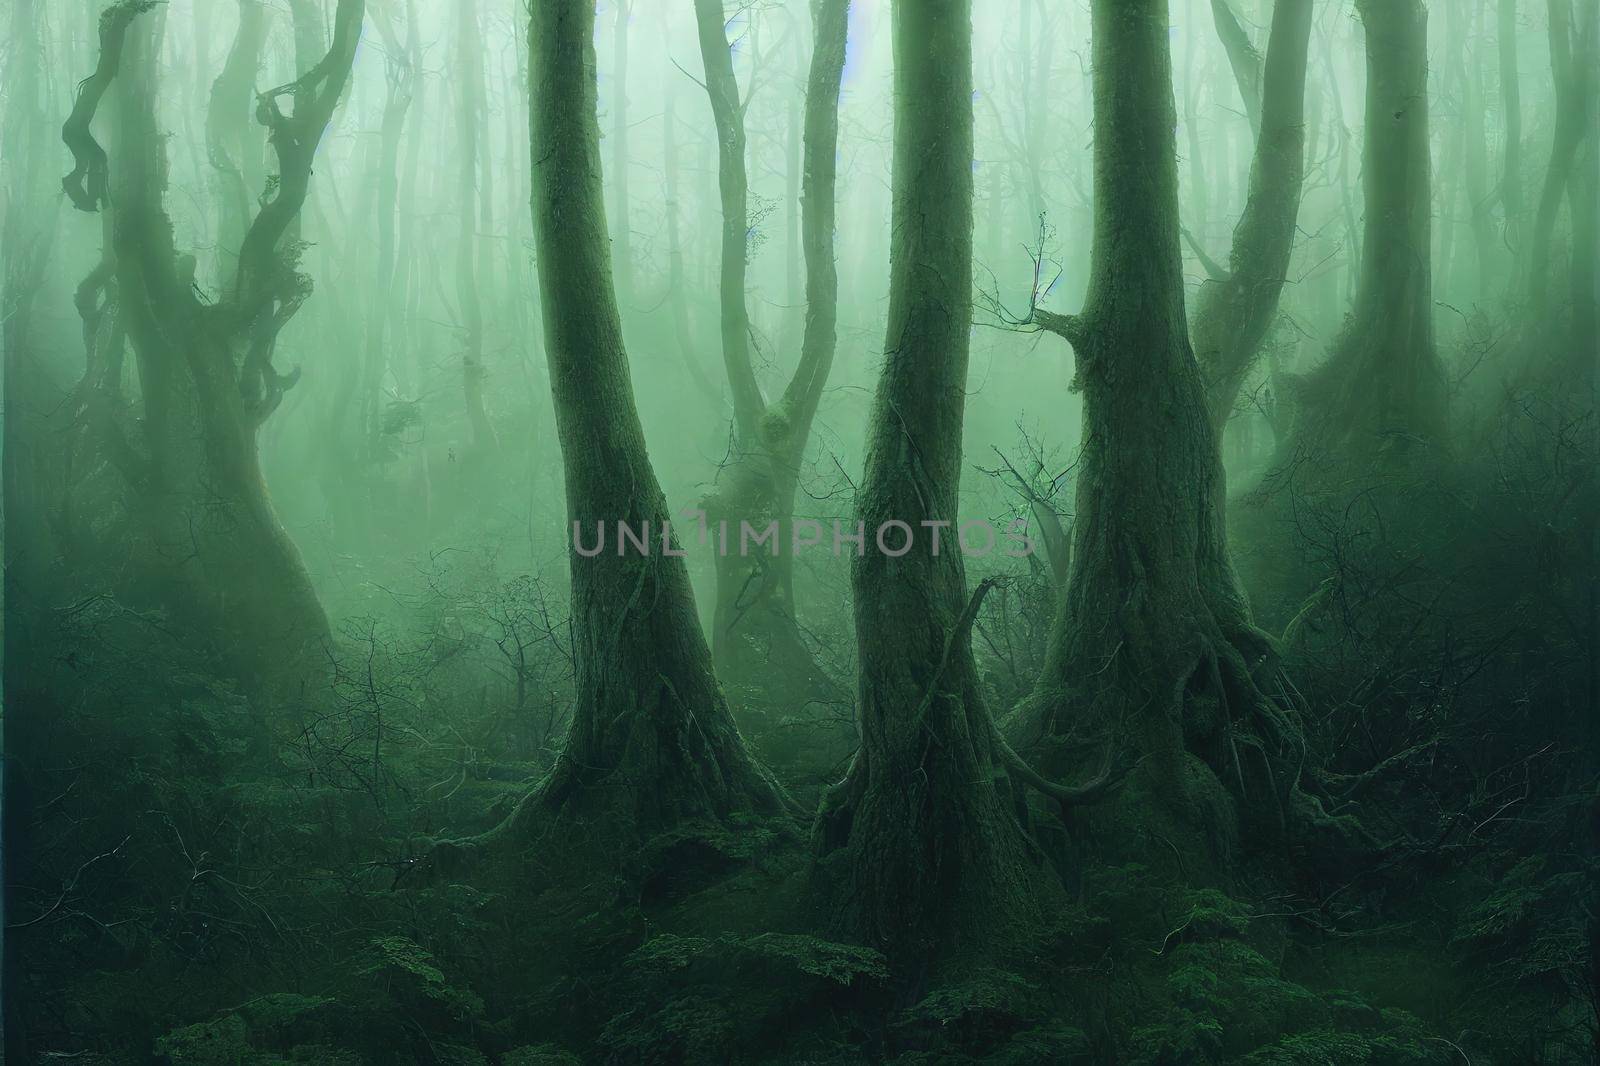 A moody, ethereal lush woodland forest with a bent by 2ragon